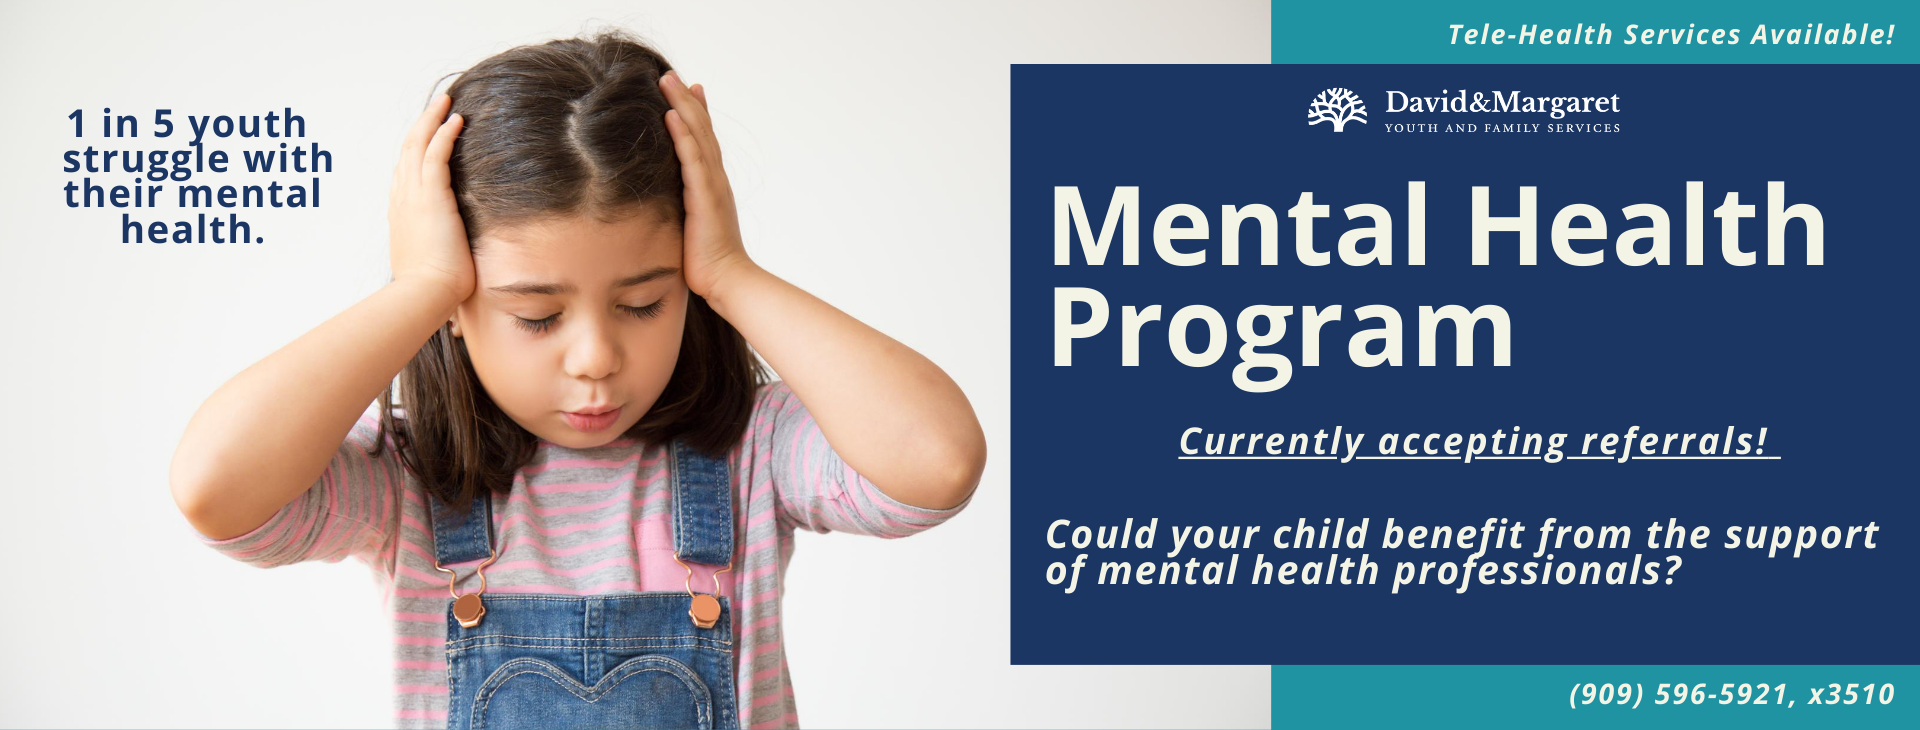 1 in 5 youth struggle with their mental health. Tele-health services available! Mental Health Program, currently accepting referrals! Could your child benefit from the support of mental health professionals? Call (909) 596-5921, x 3510